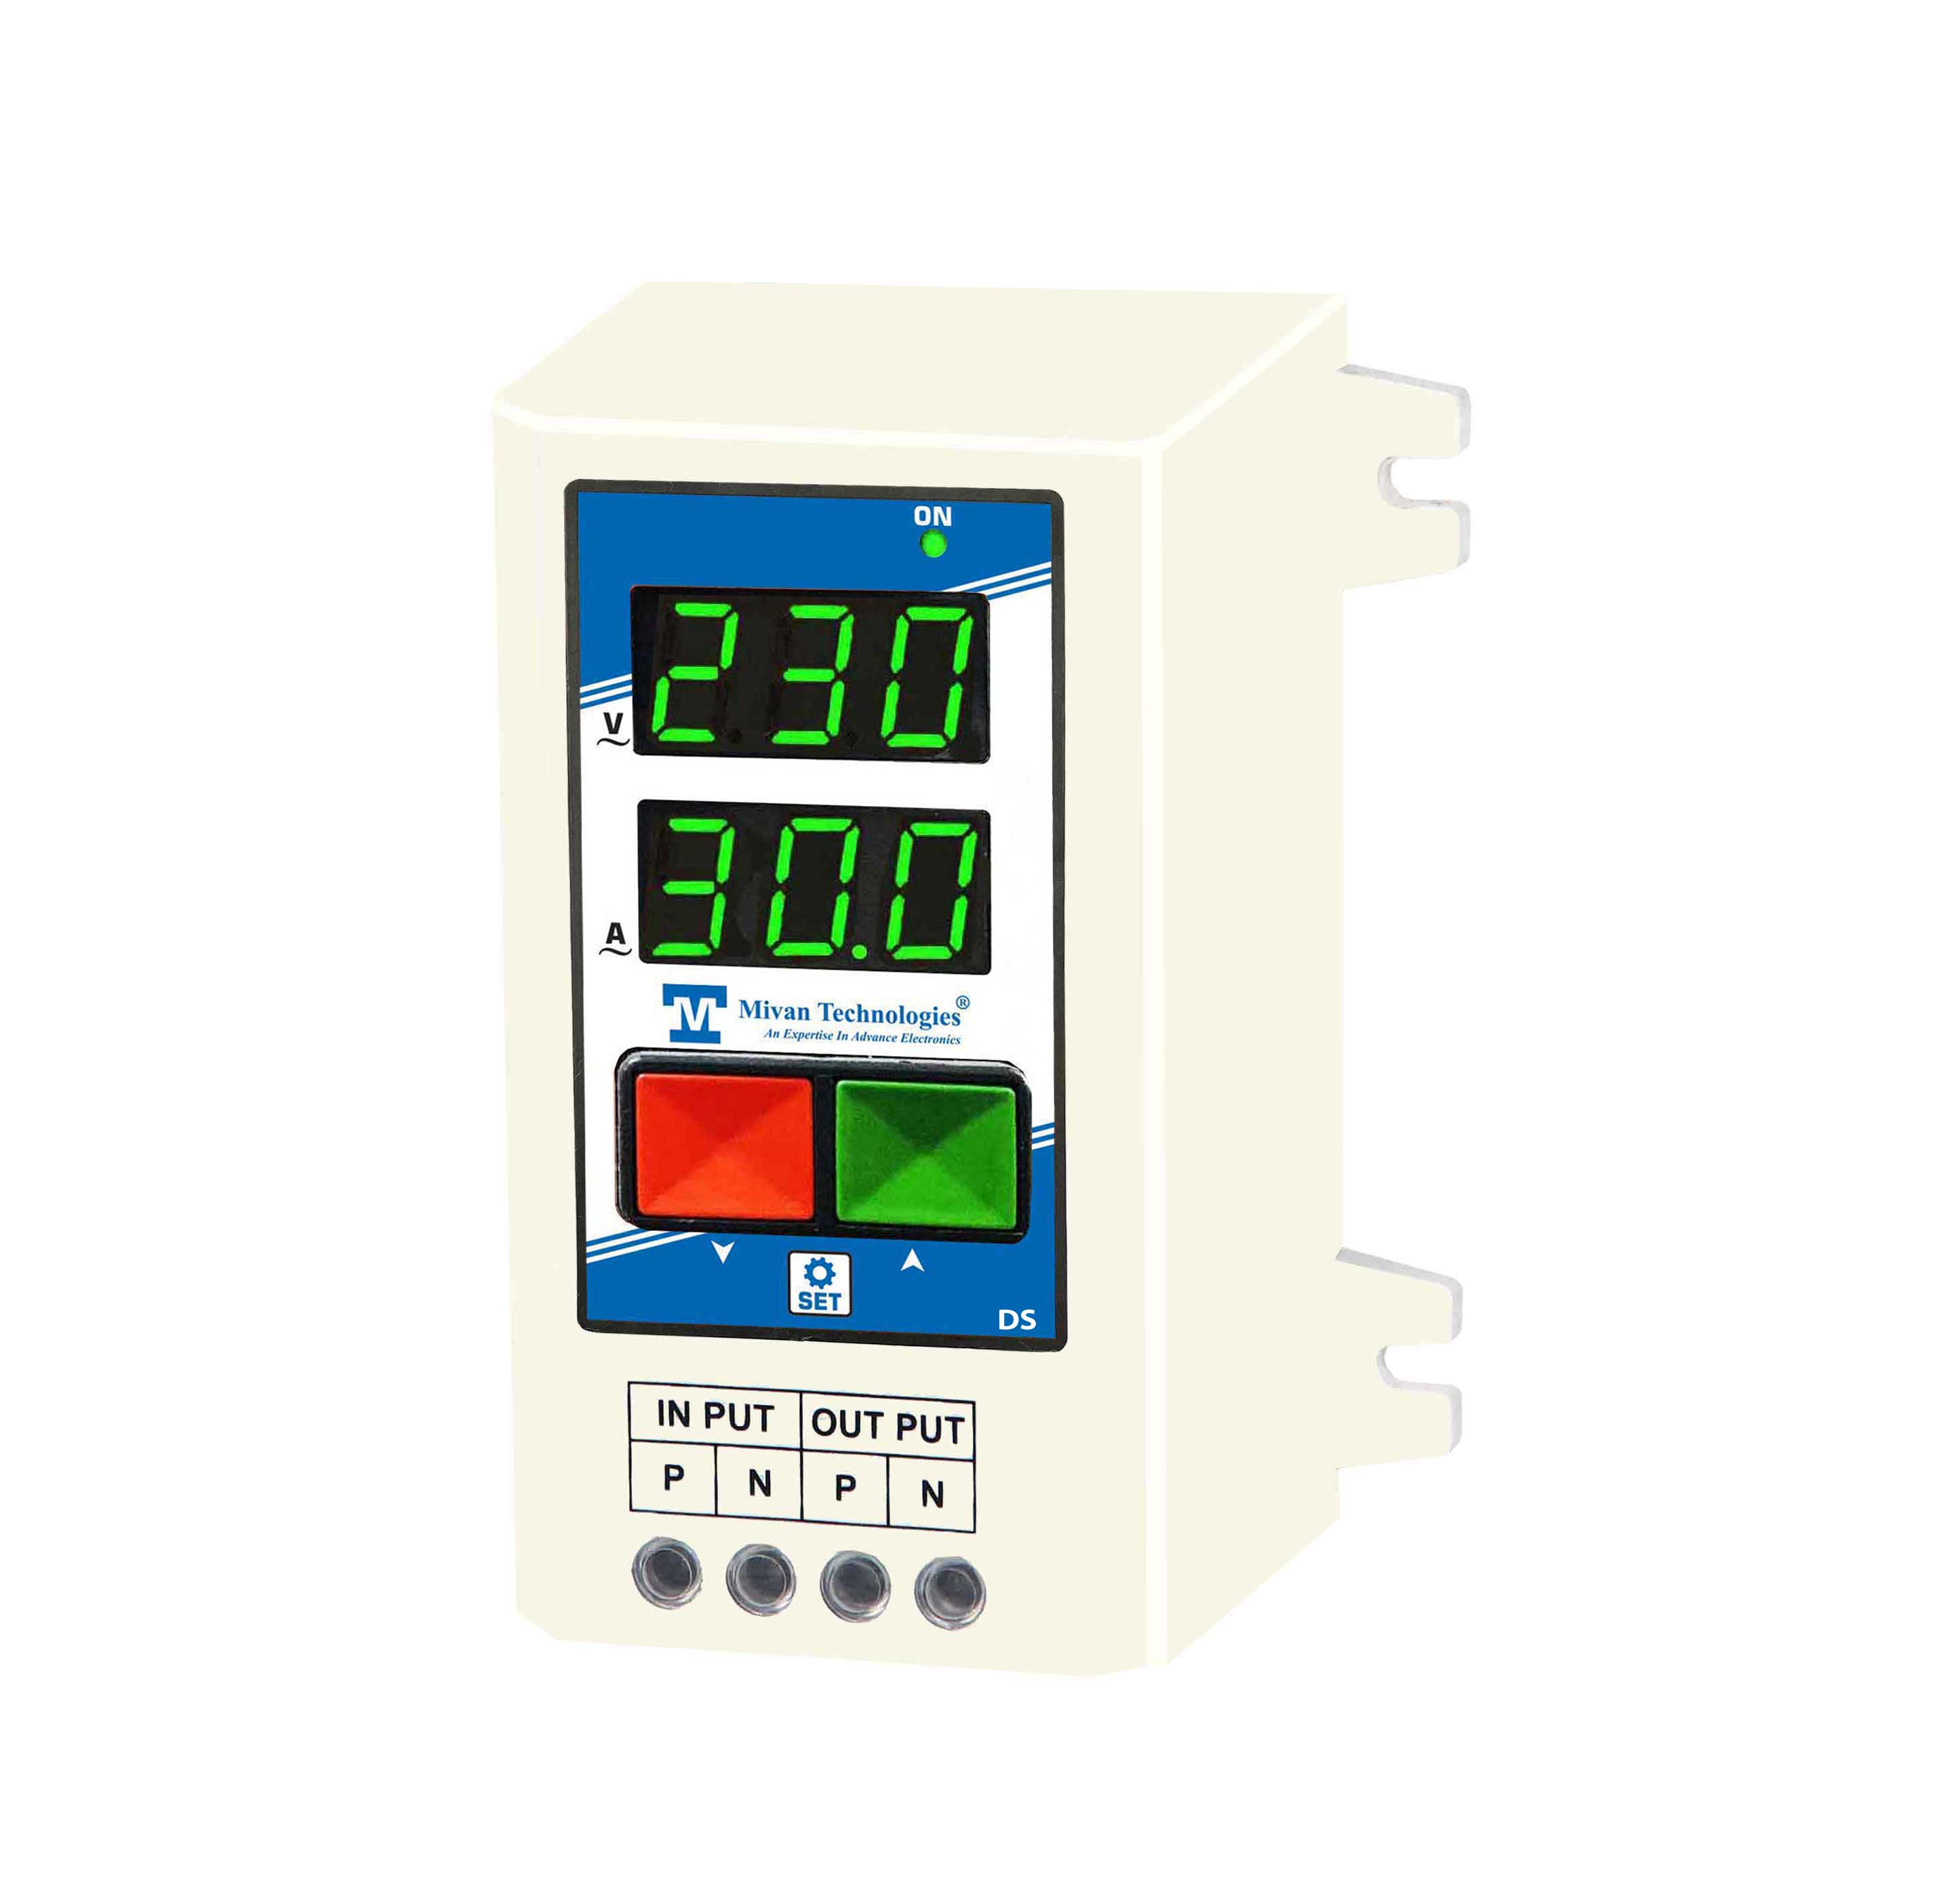 Single Phase digital voltage protection relay with high and low voltage protection suitable for all single phase appliances Suitable up to 3 hp motor